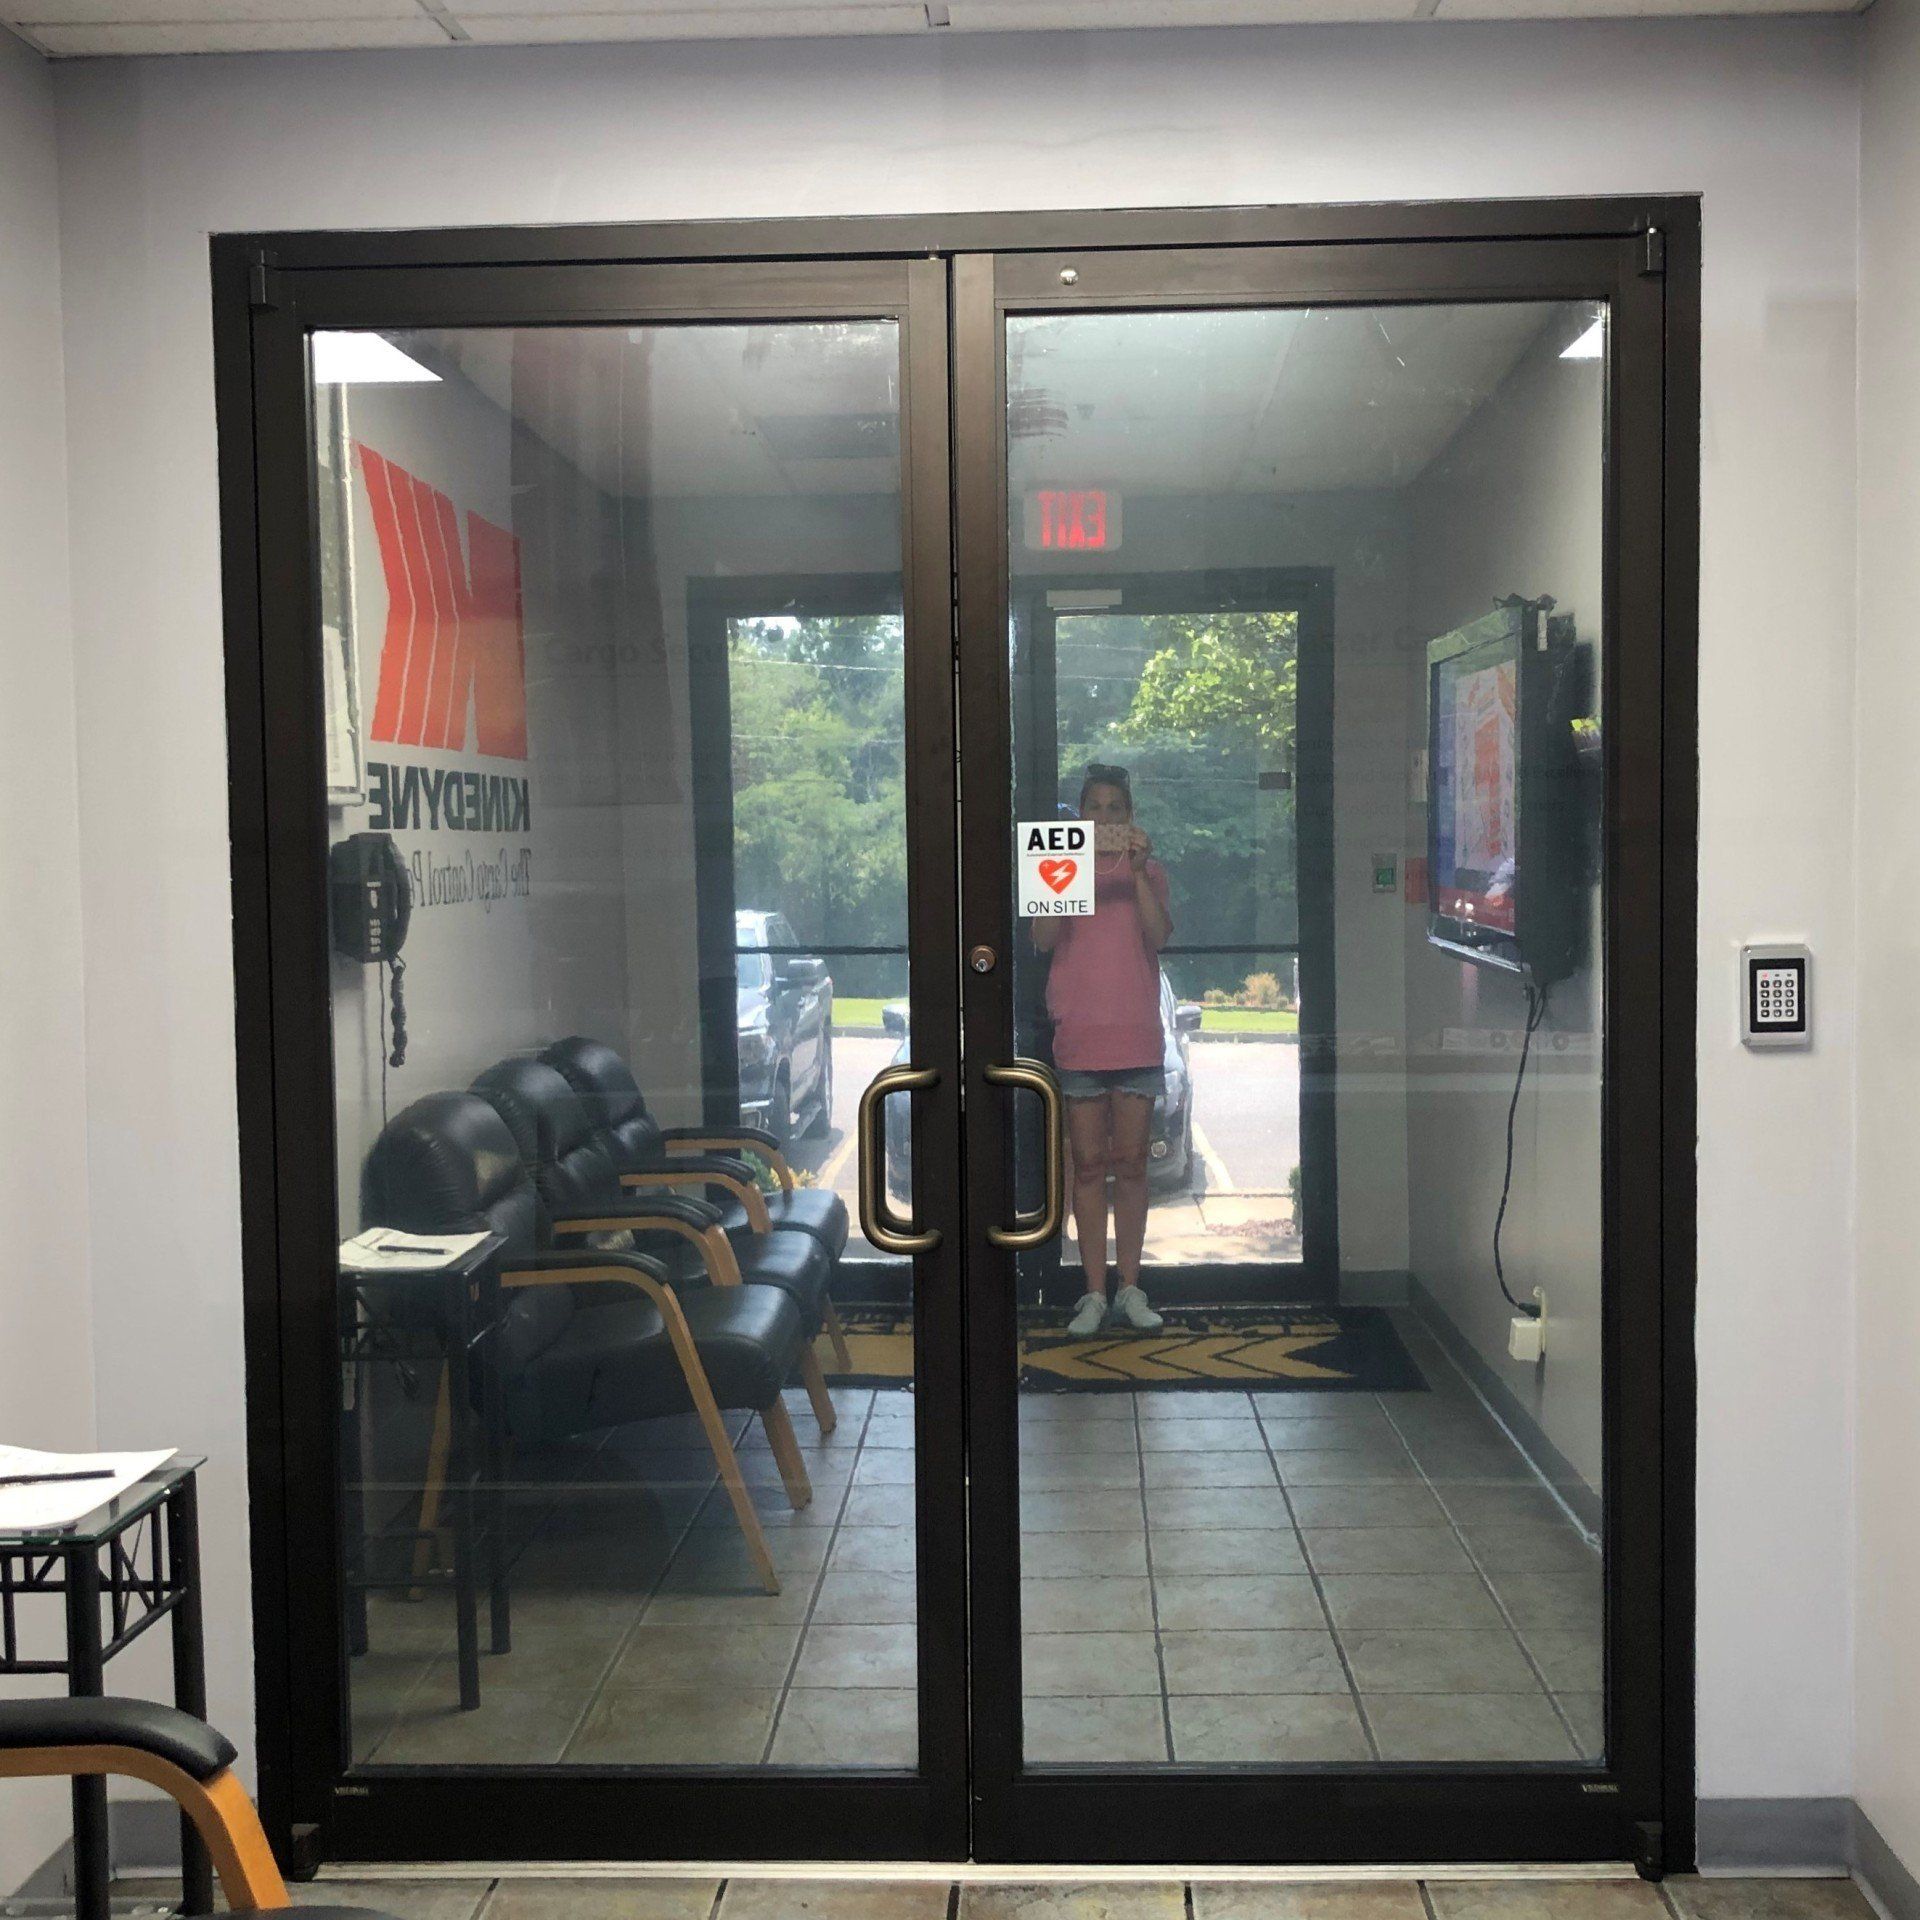 theft prevention - Looking out after SPF Ultimate Security film adds safety glass integrity to door windows. Preventing an armed break-in. Prattville AL